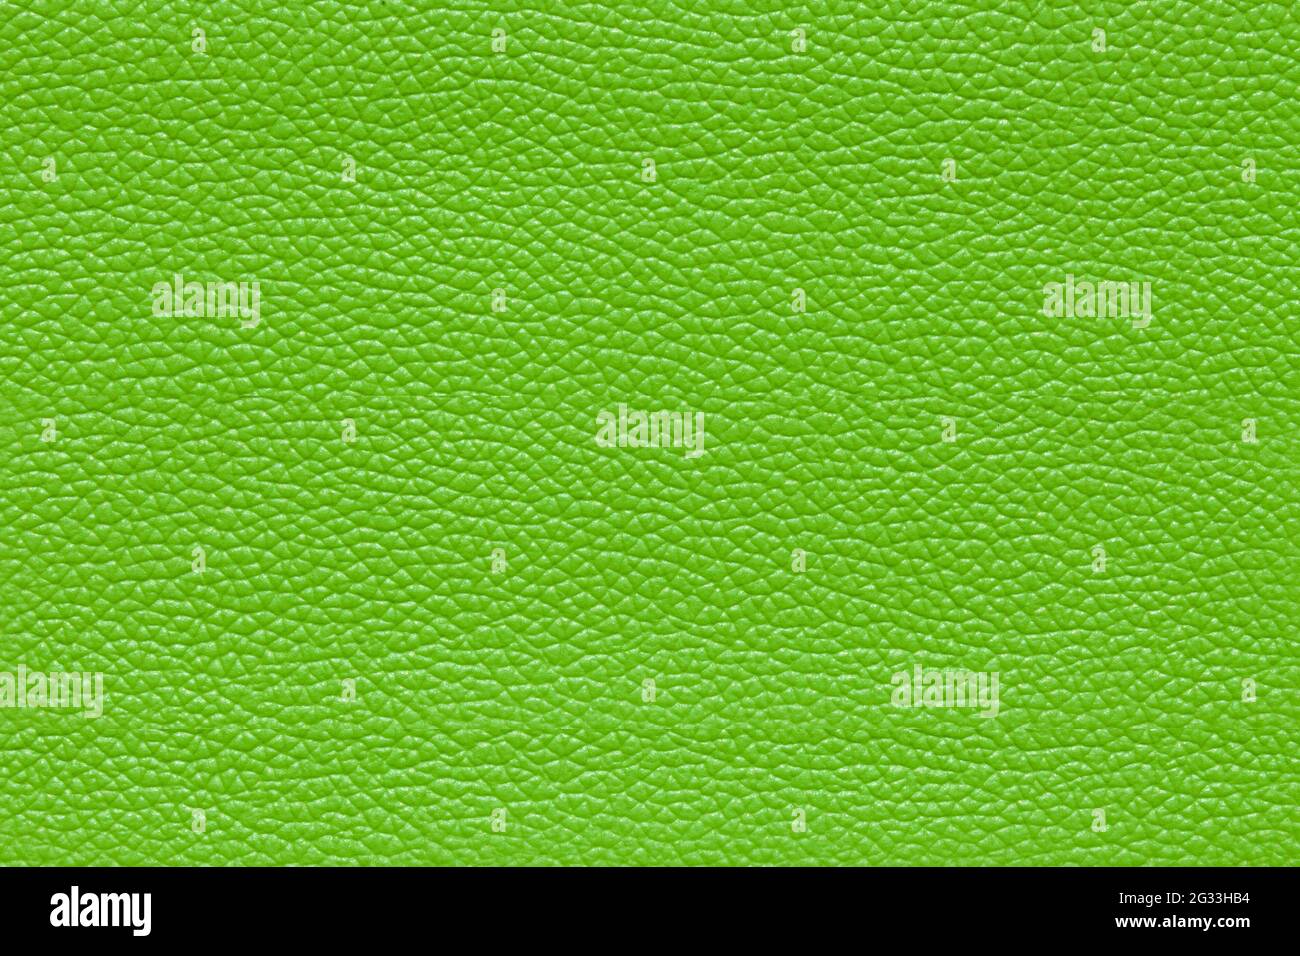 Background image - green leather with textured abstract pattern. Stock Photo